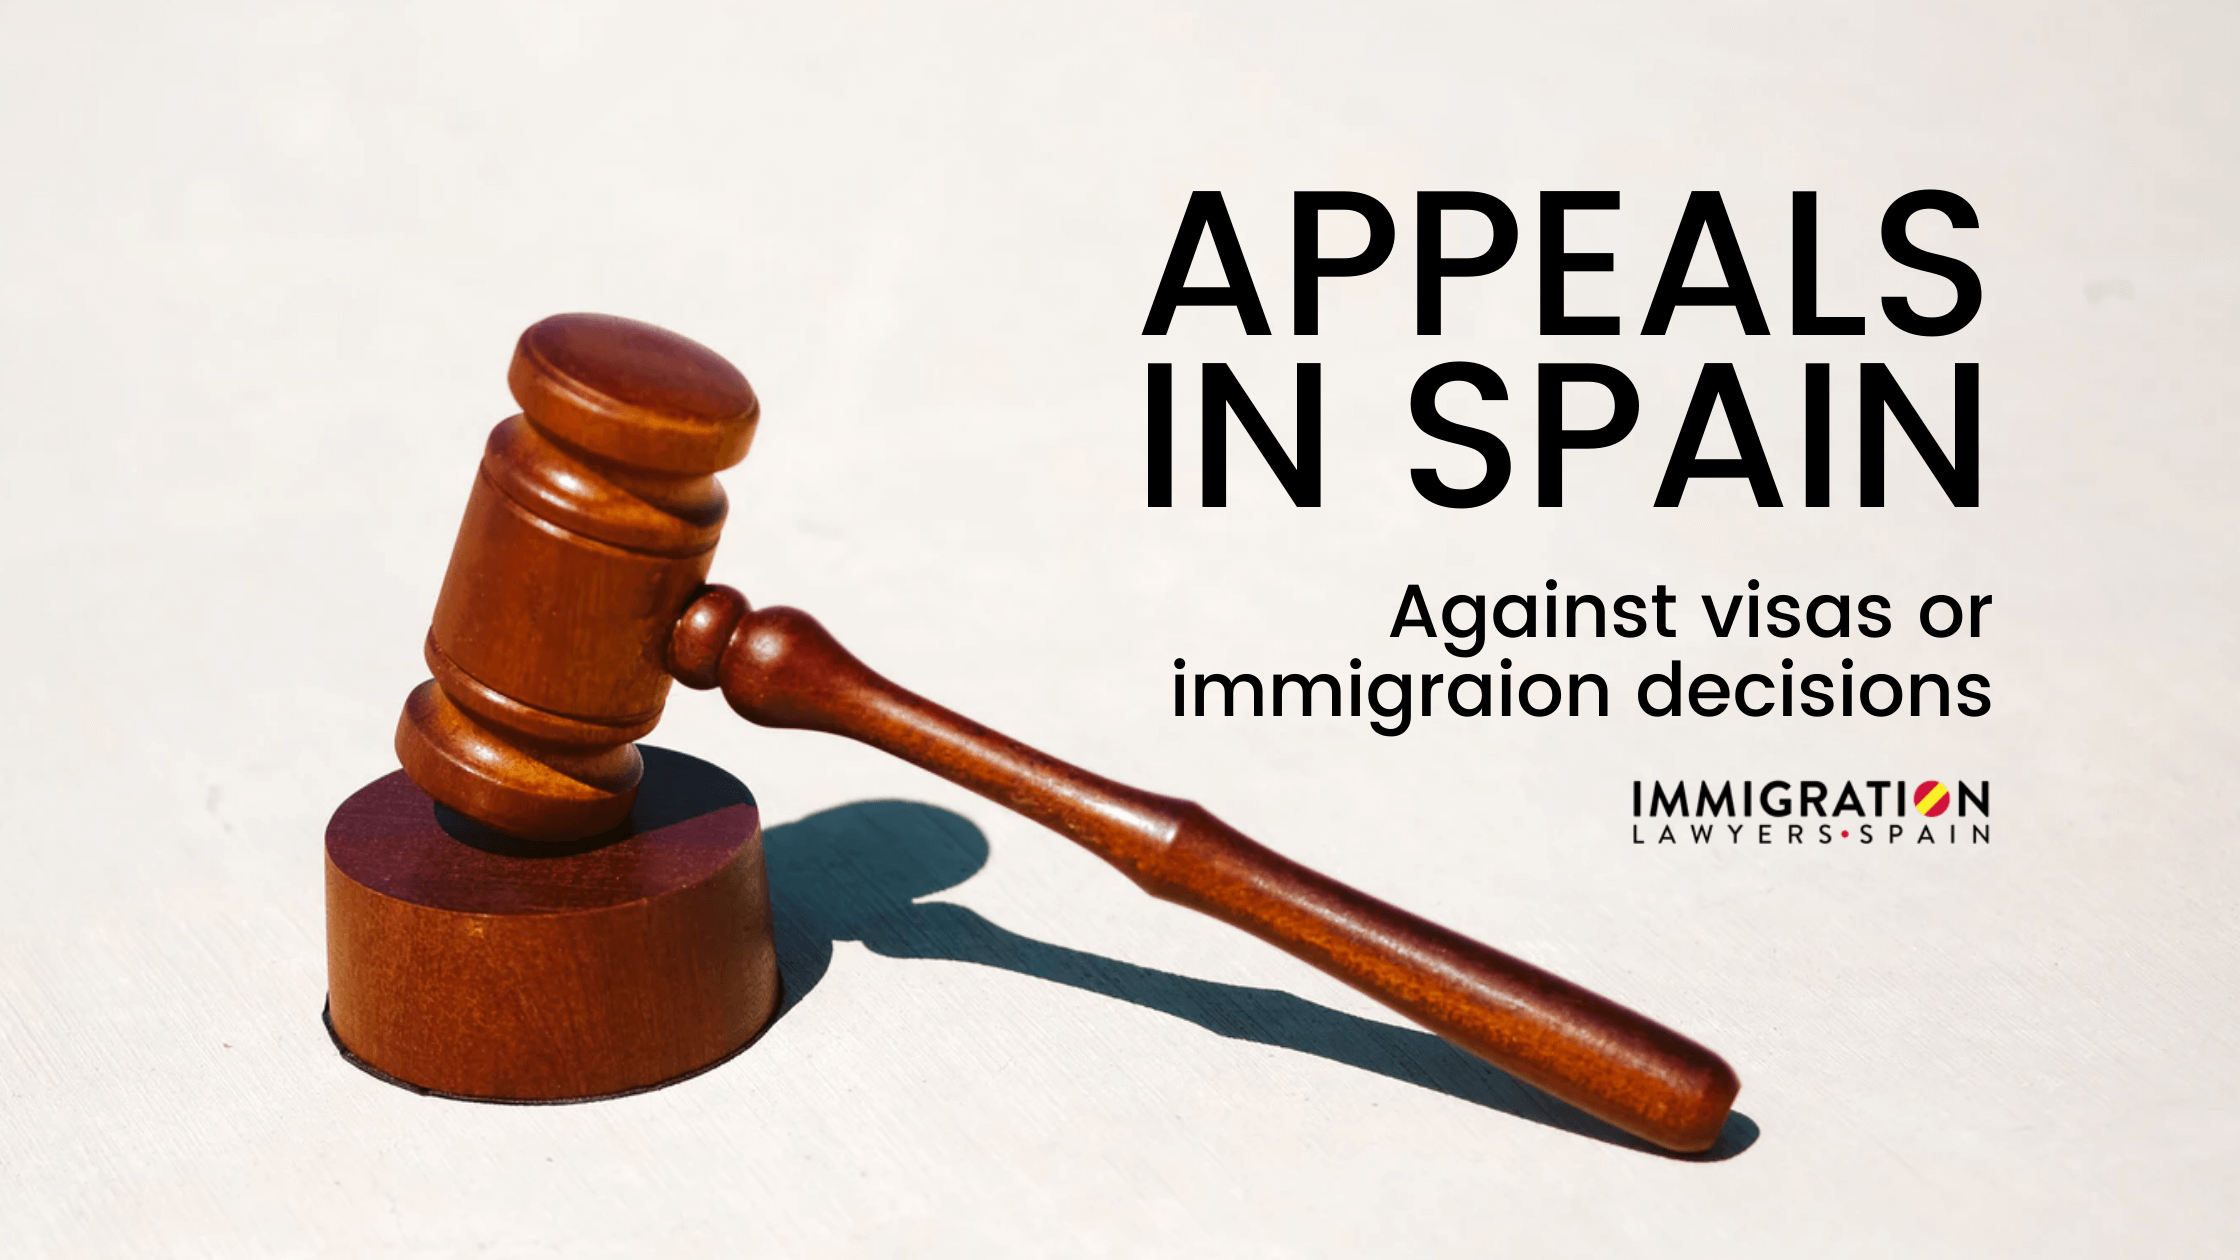 Appeal Against Visa or Immigration Decision in Spain